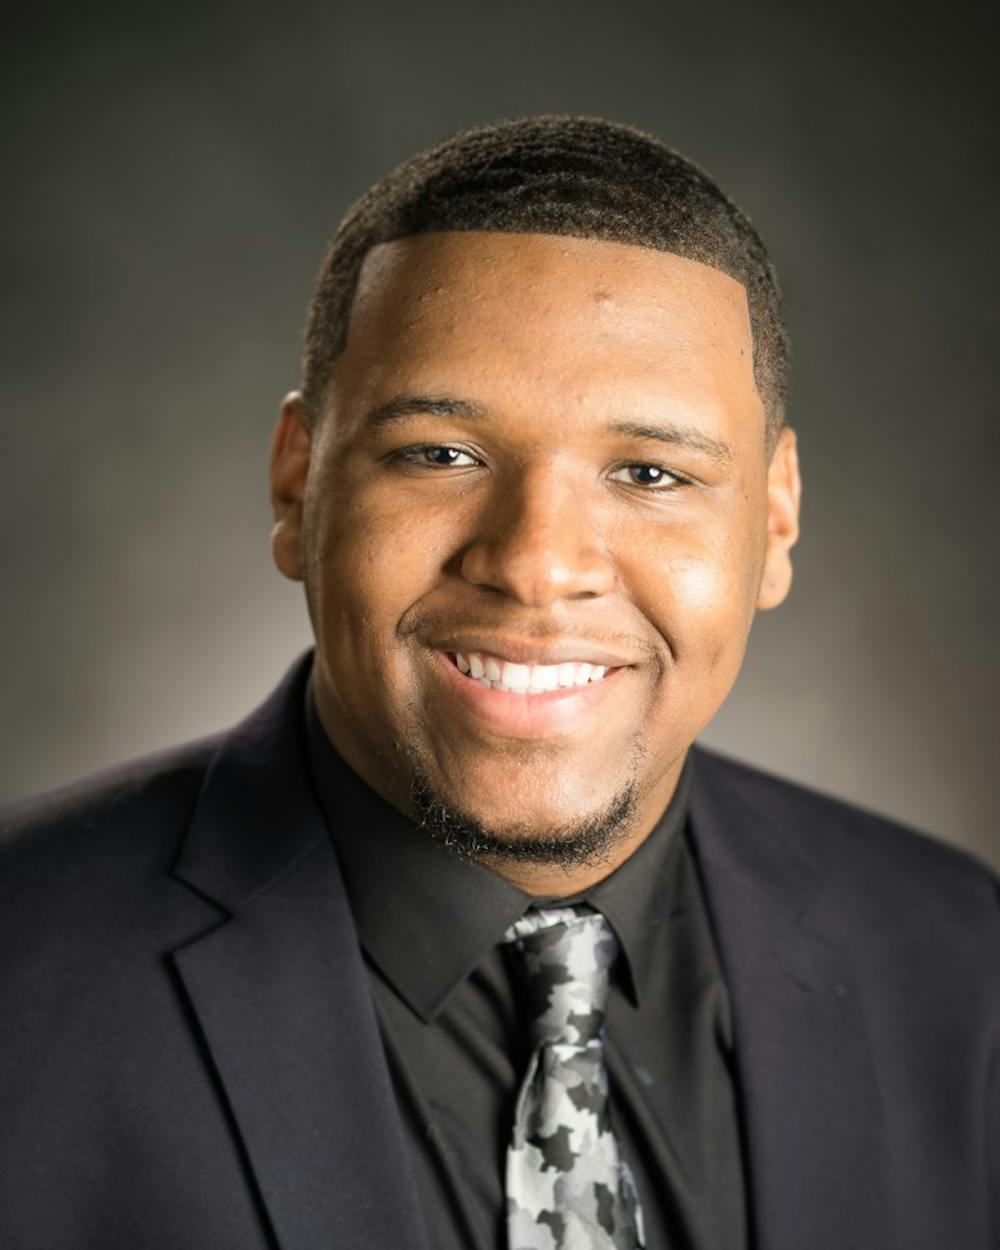 <p>MSU 2018 Homecoming Court ambassador and Forbes Under 30 Scholar Malik Amir Mix. <strong>Photo courtesy of MSU Communications and Brand Strategy.&nbsp;</strong></p>